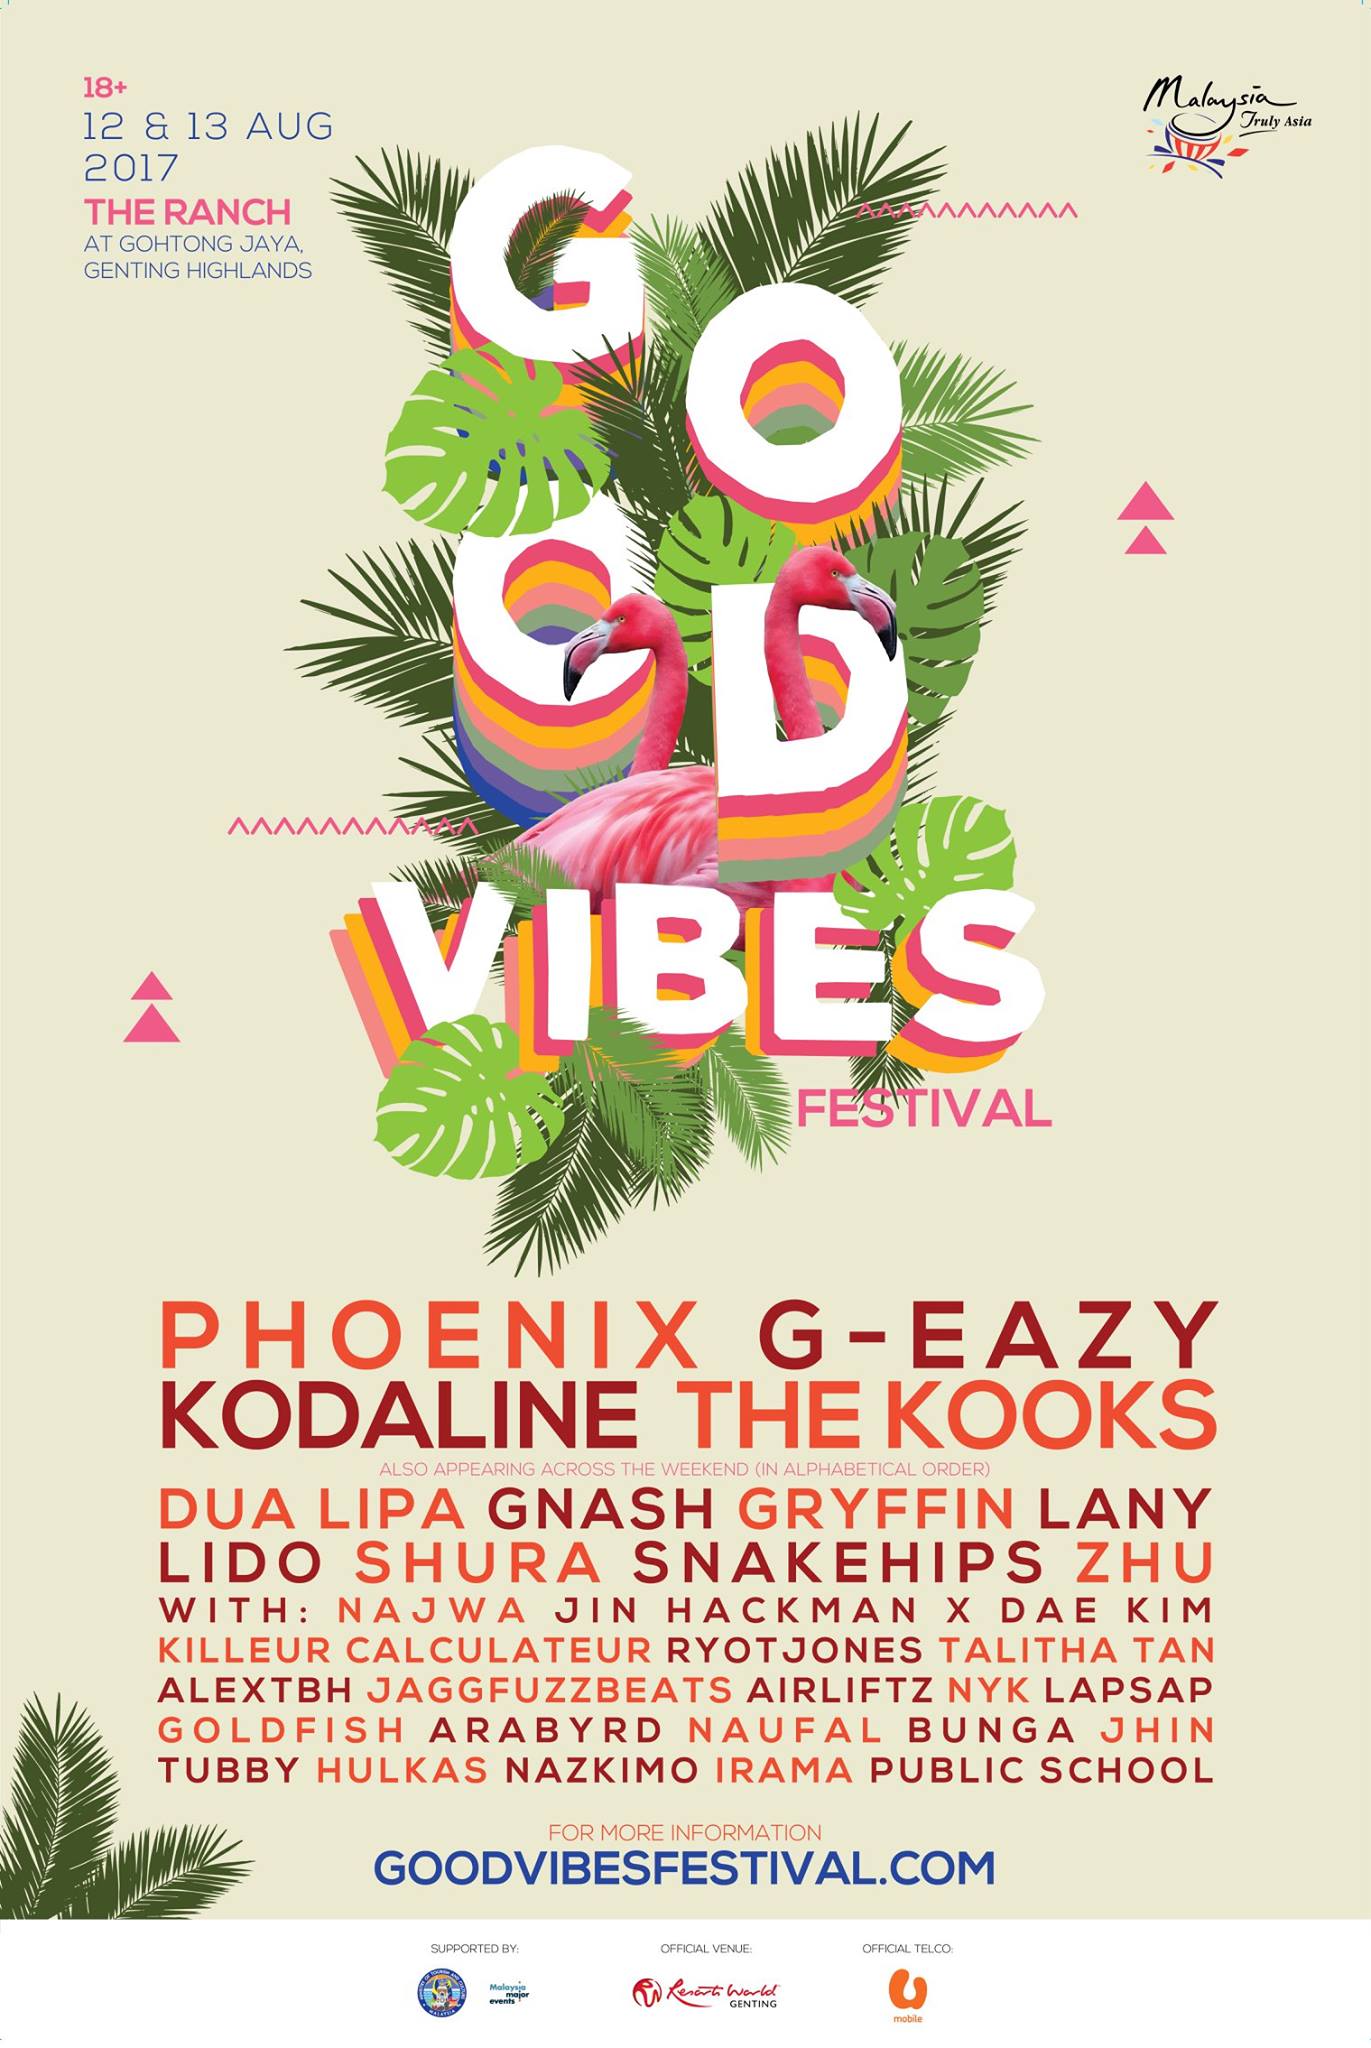 Good Vibes Festival 2017 Is Happening On 12th To 13th August!-Pamper.my